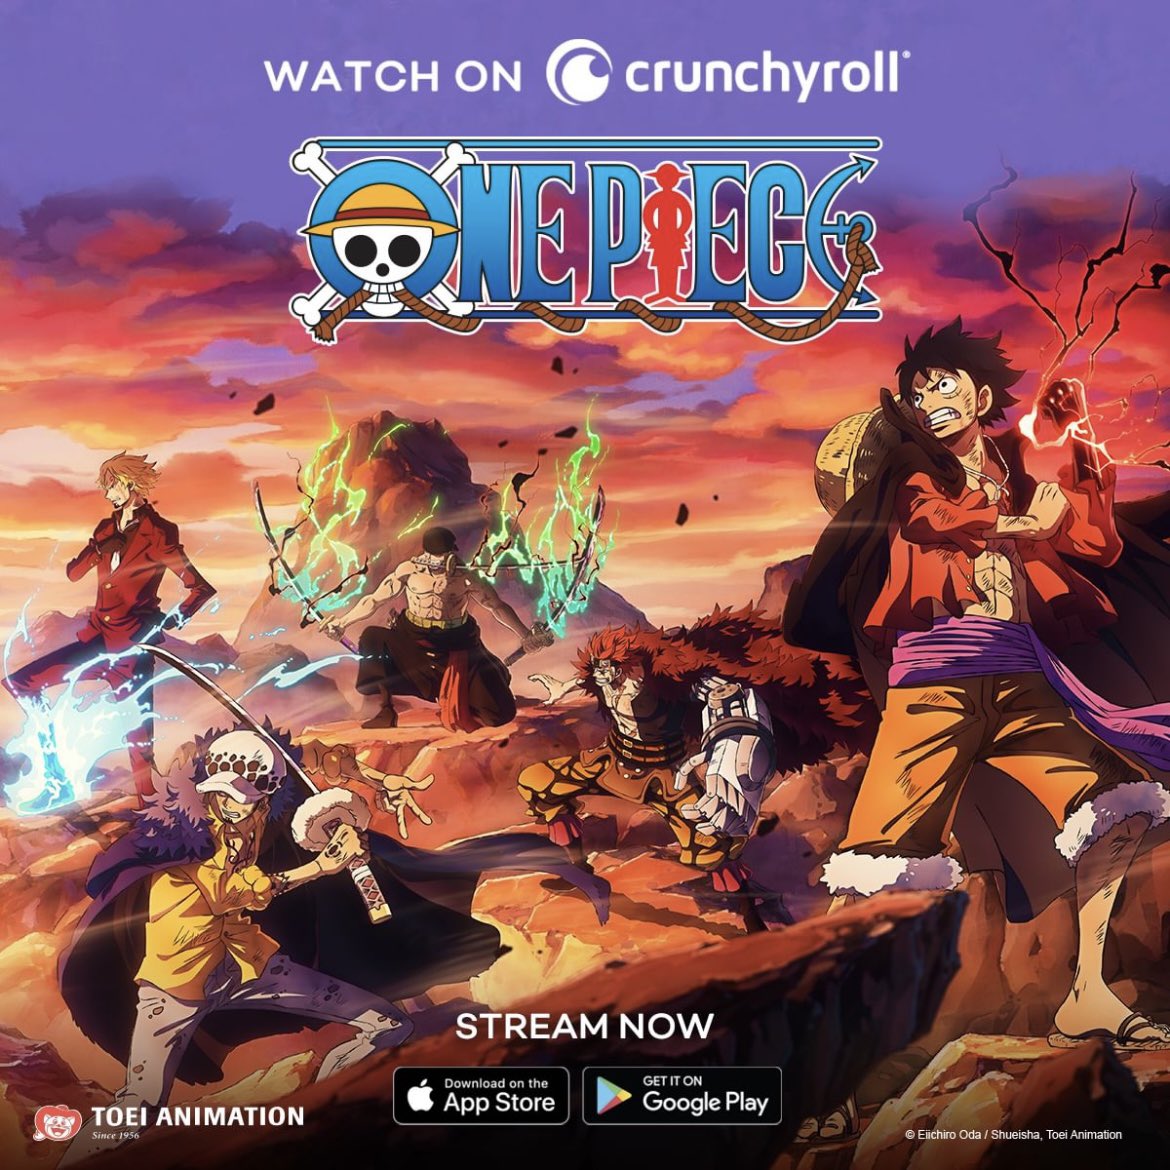 Three #ONEPIECE films are now available to watch on Crunchyroll